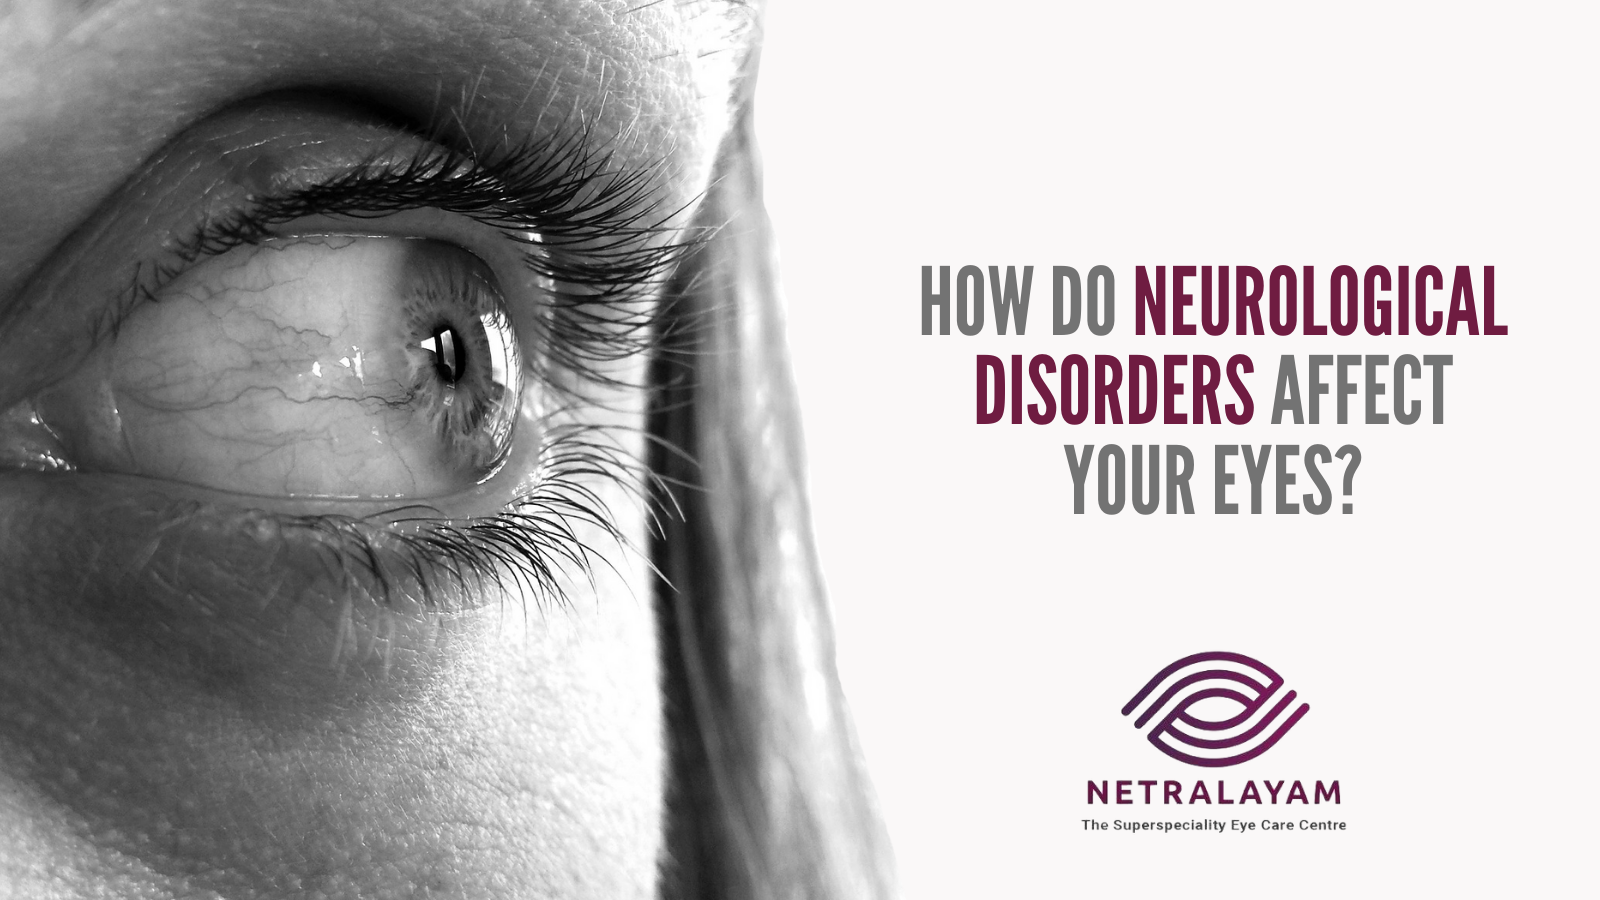 How do Neurological Disorders Affect Your Eyes?